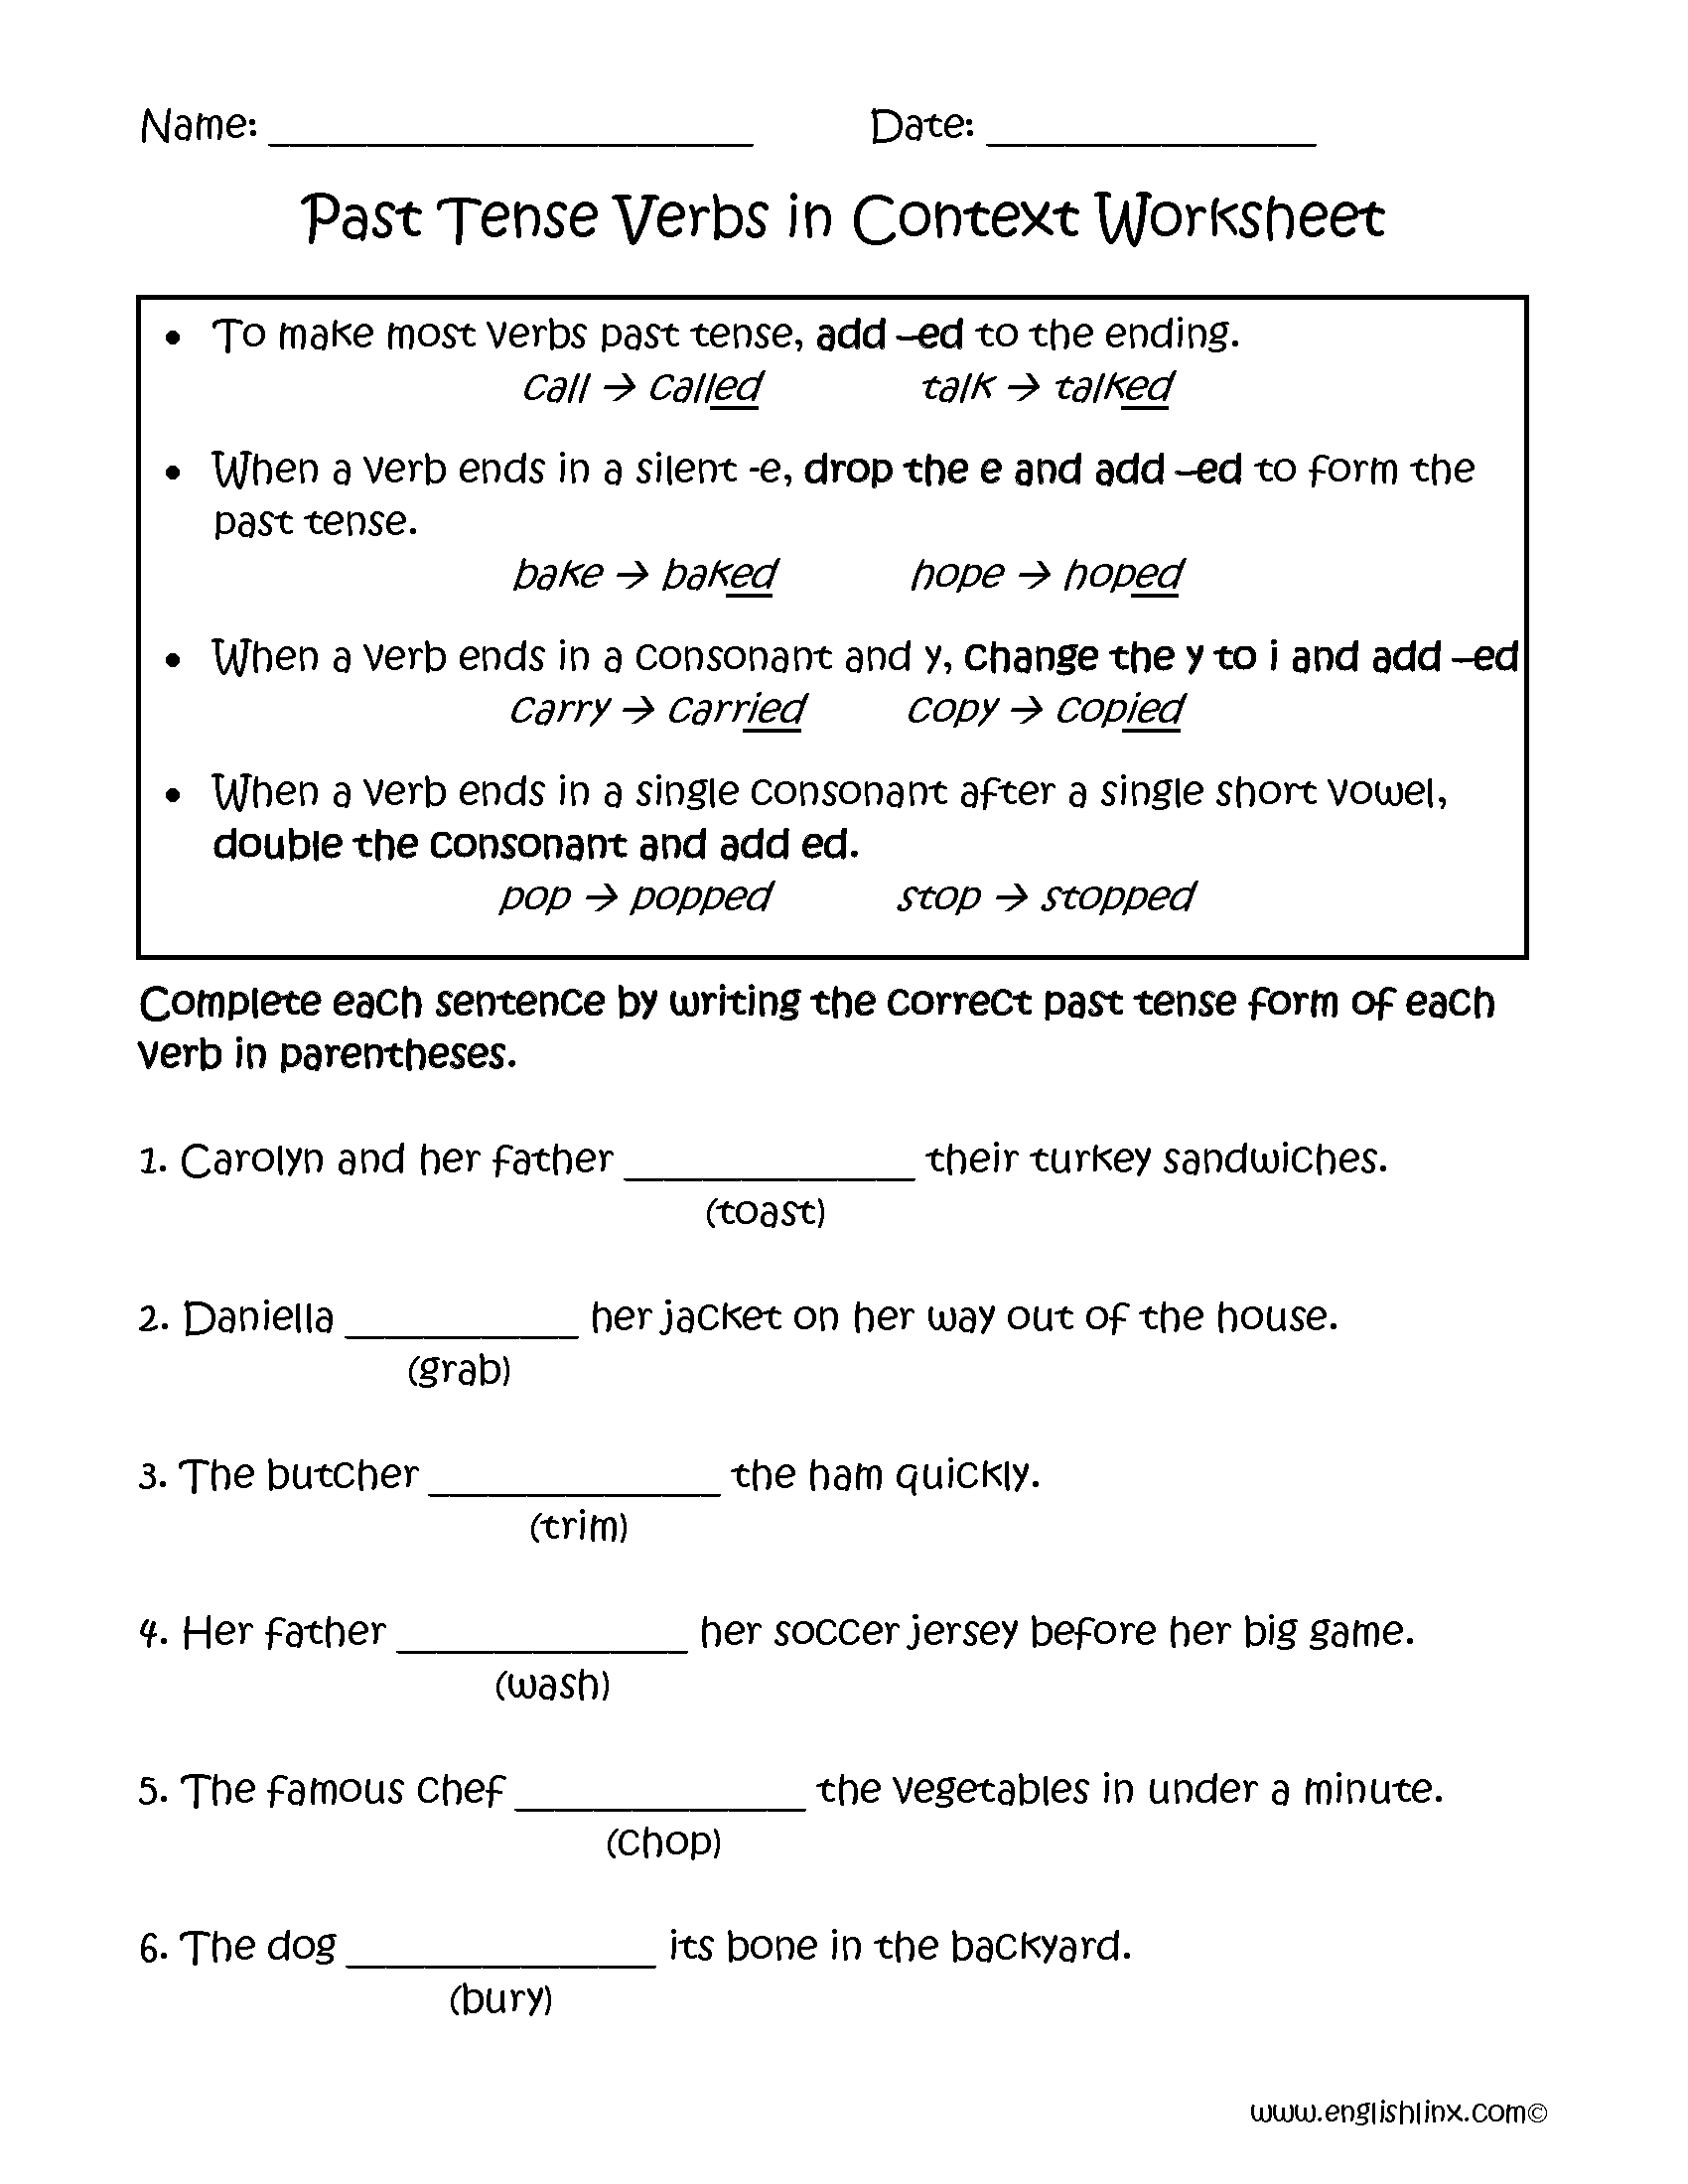 Past Tense Verbs In Context Worksheets | Englishlinx Board - Free Printable Past Tense Verbs Worksheets